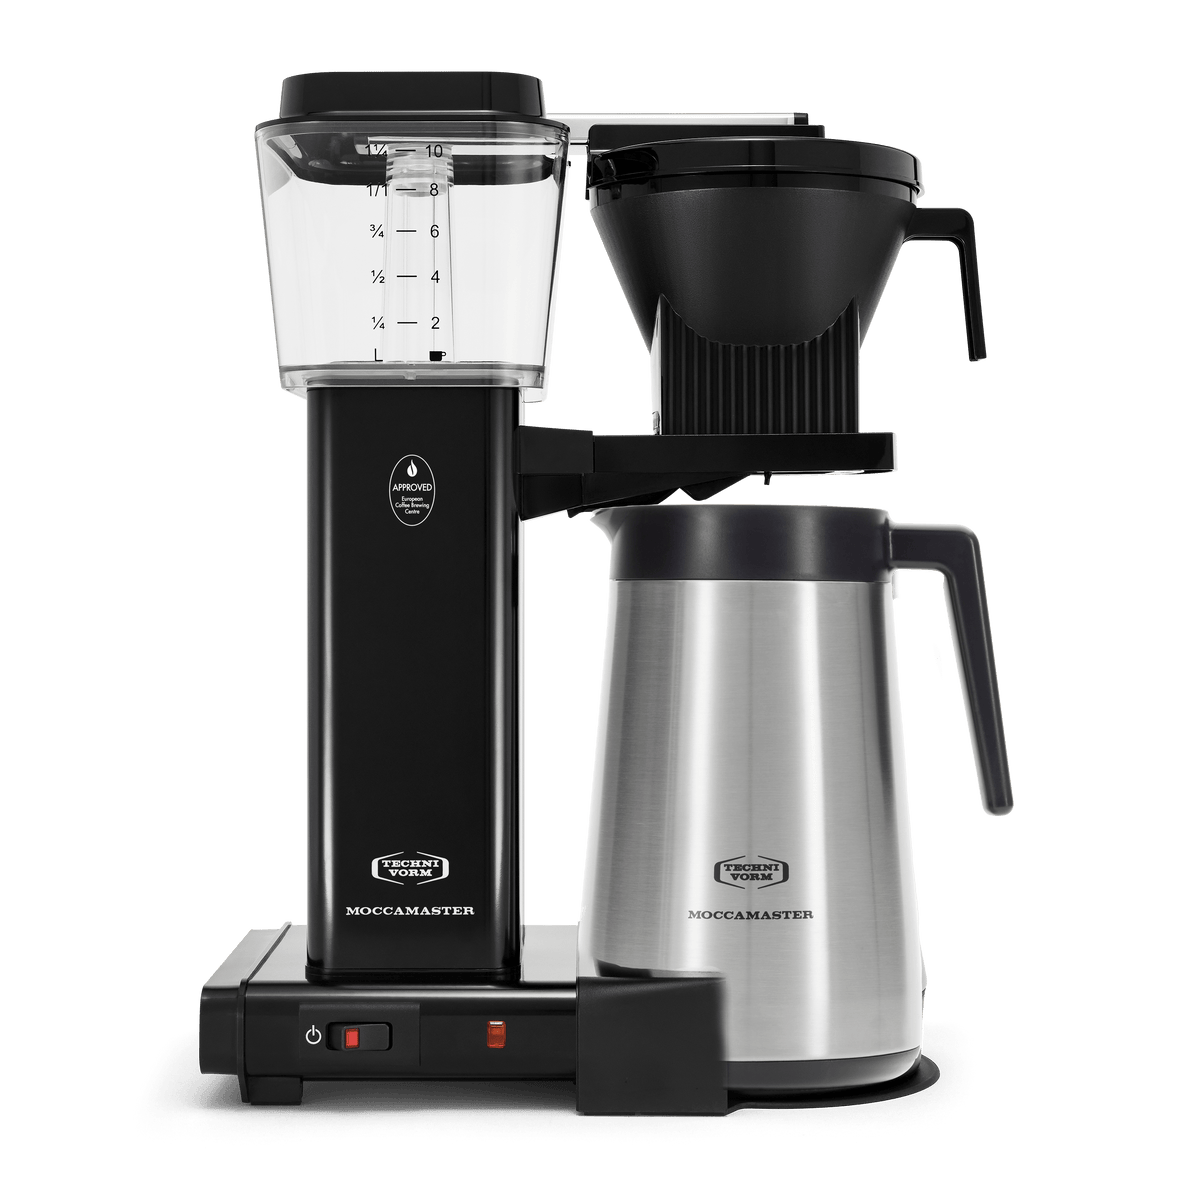 Front shot showing Moccamaster KBGT in Black, with rectangular tower and base, clear acrylic water reservoir with fill level marks, power and switch, stainless steel thermal carafe with black handle, and black automatic brew basket.  